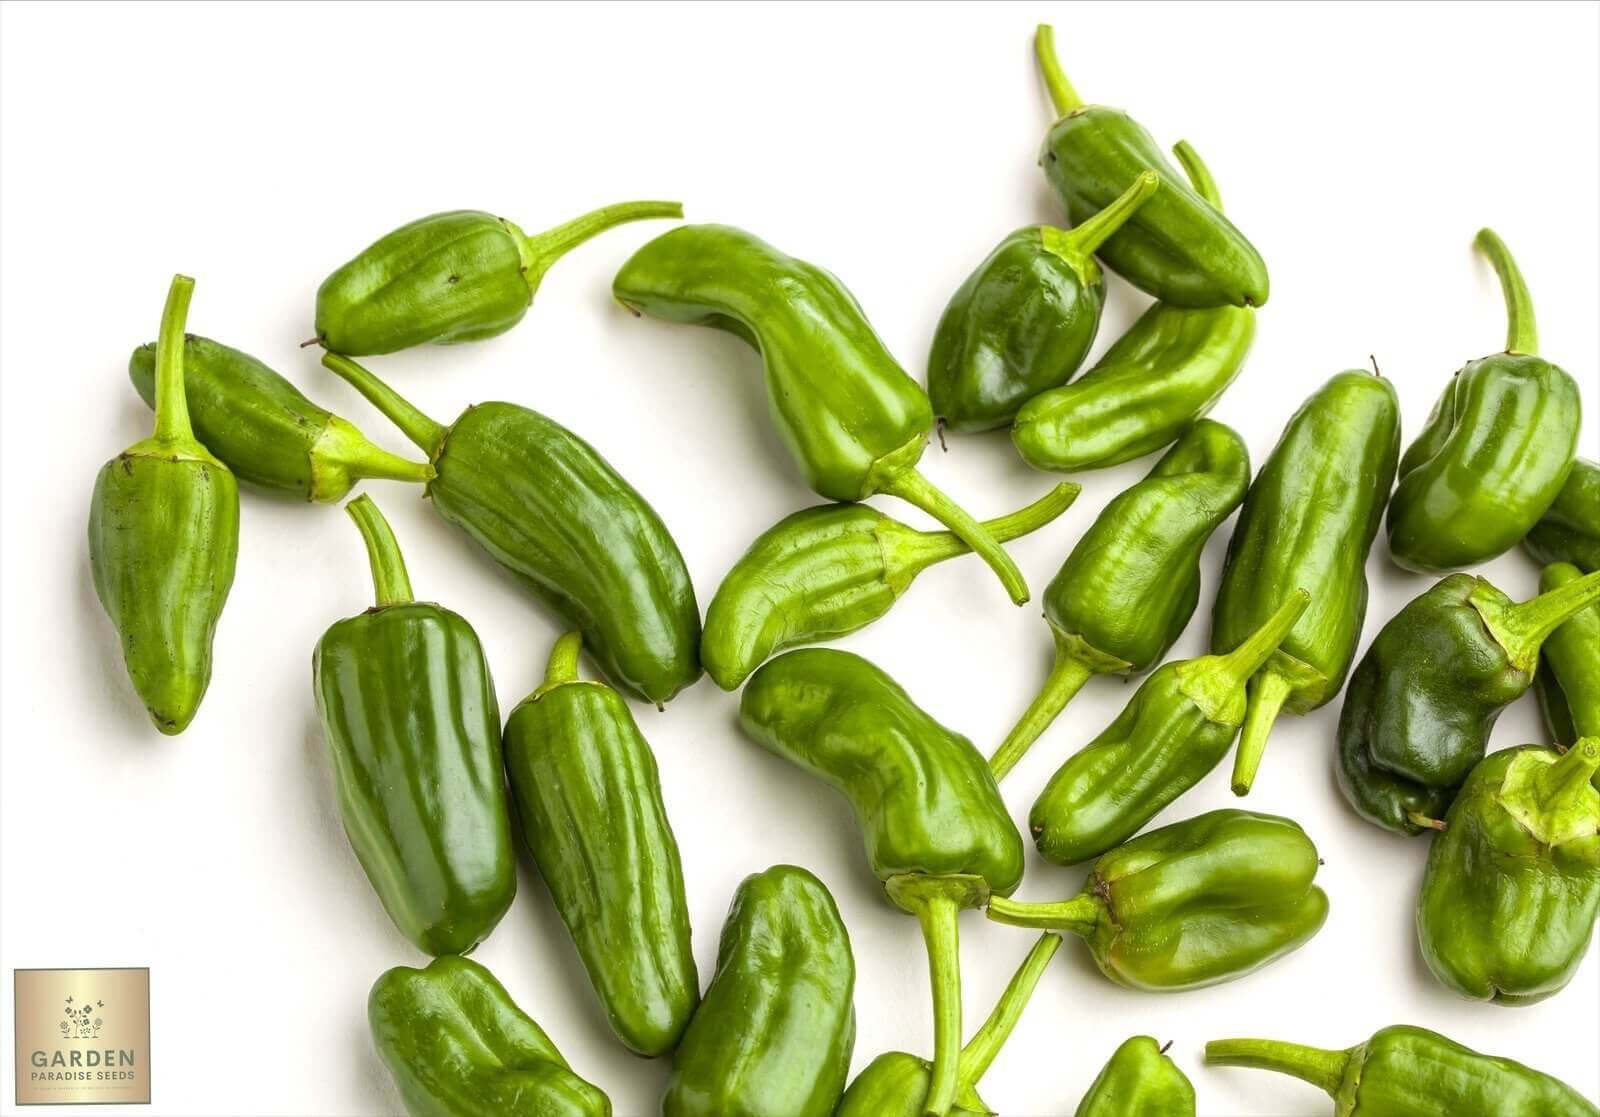 Buy Pimientos de Padrón Chili Pepper Seeds - Spice Up Your Garden 